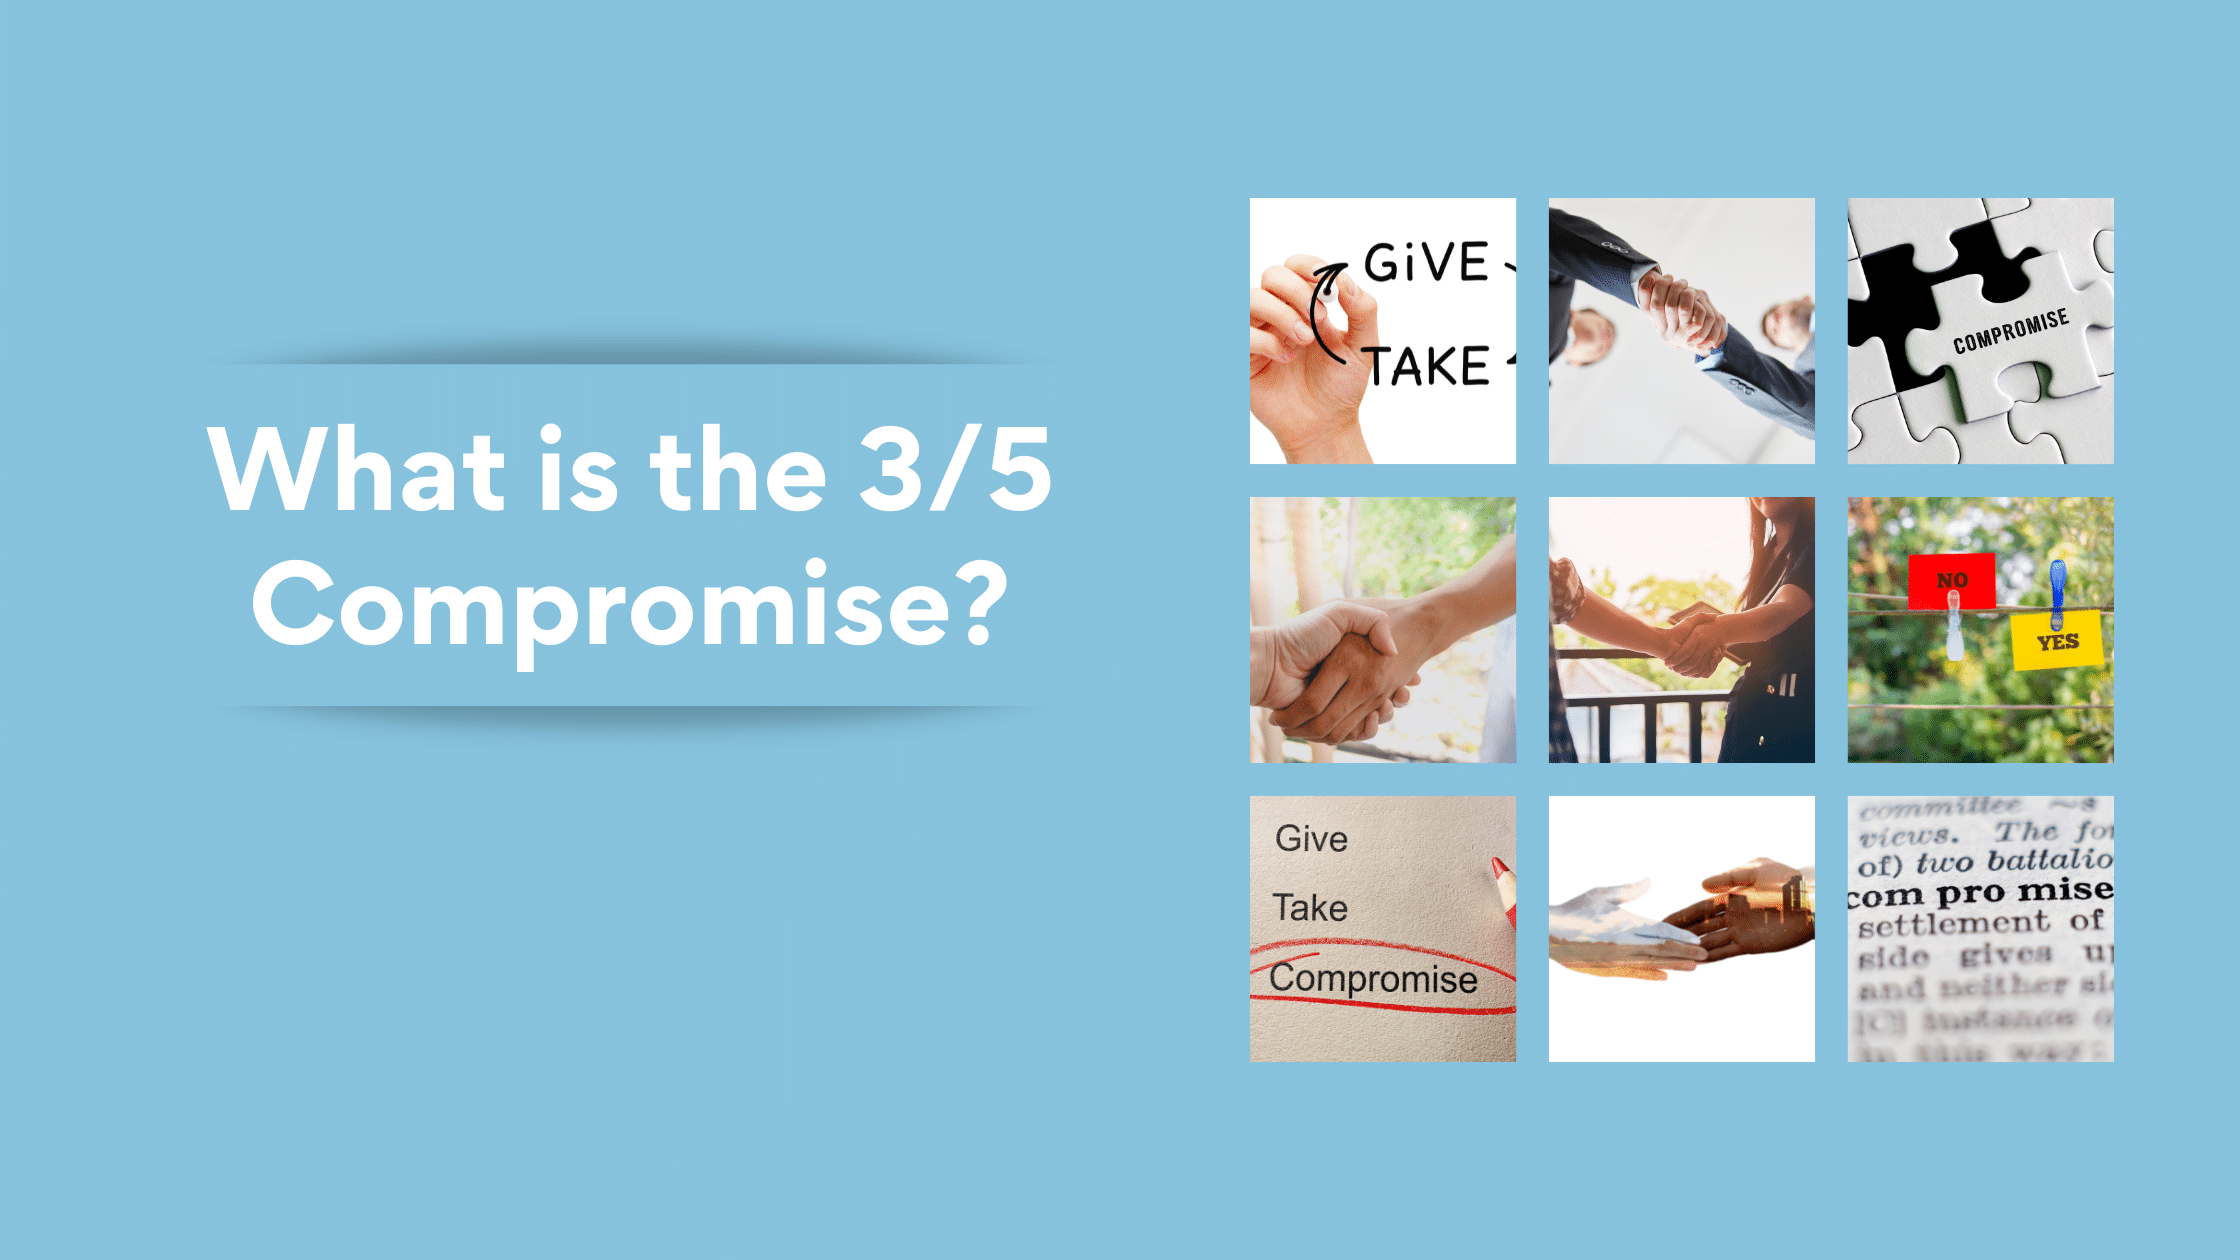 3/5 Compromise